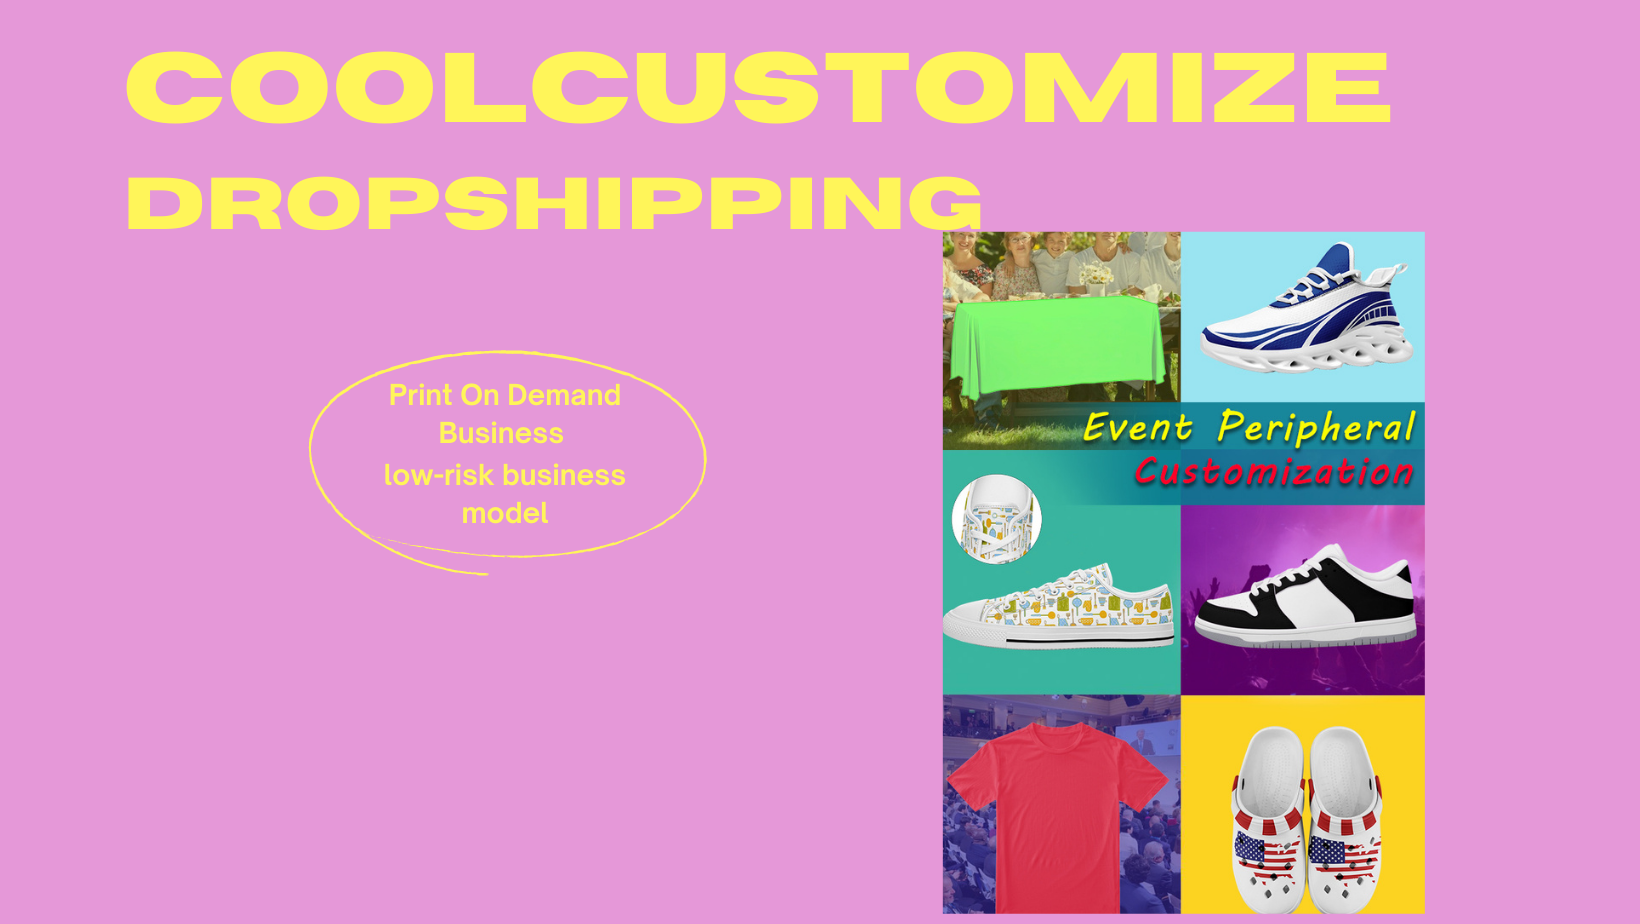 How to Become an Expert in Drop Shipping and Build a Profitable Business with Custom Clothing